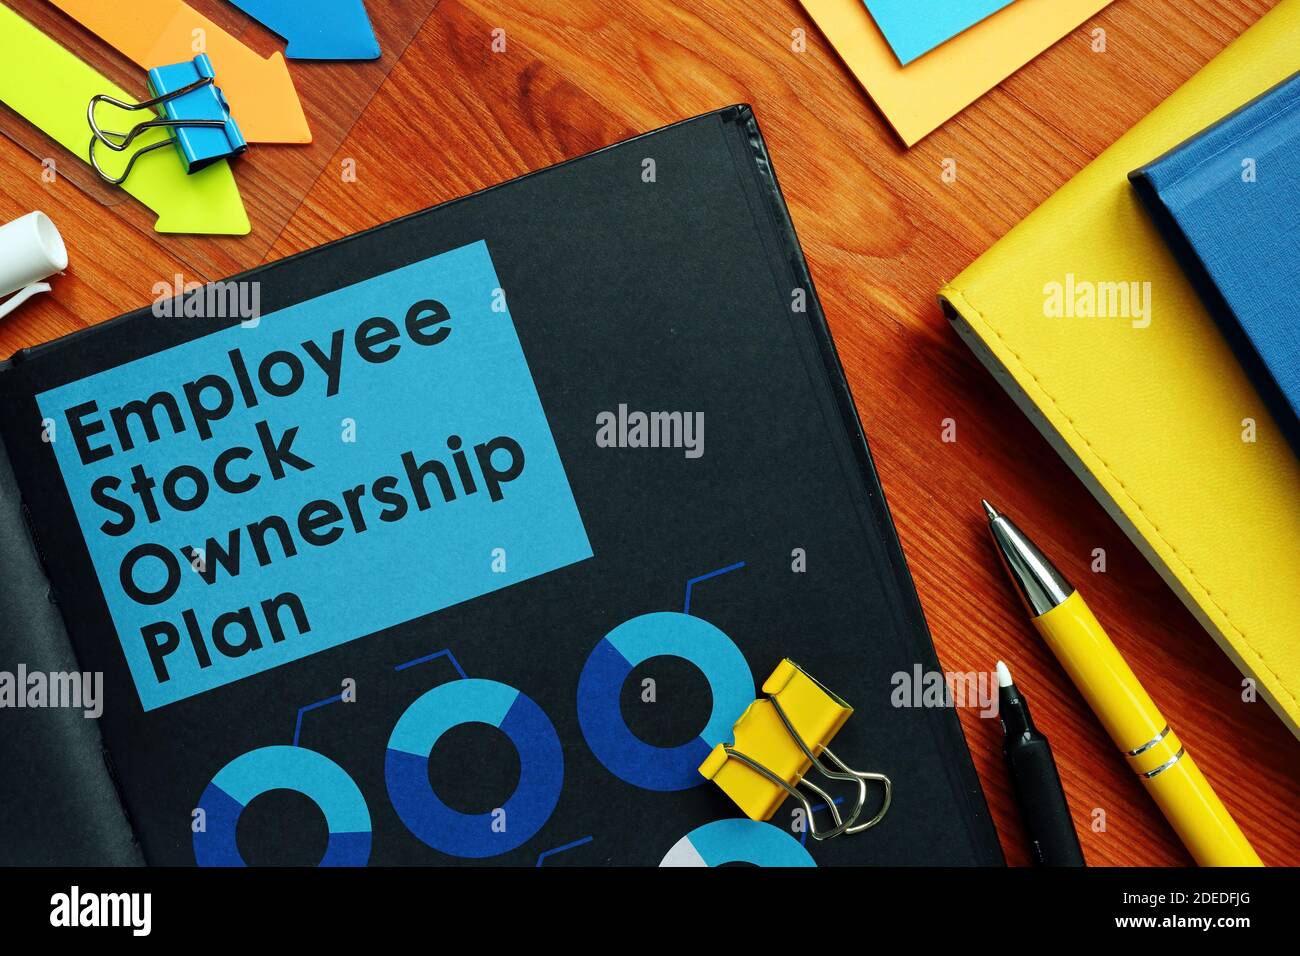 Employee Stock Ownership Plan ESOP and charts on the black pages. Stock Photo